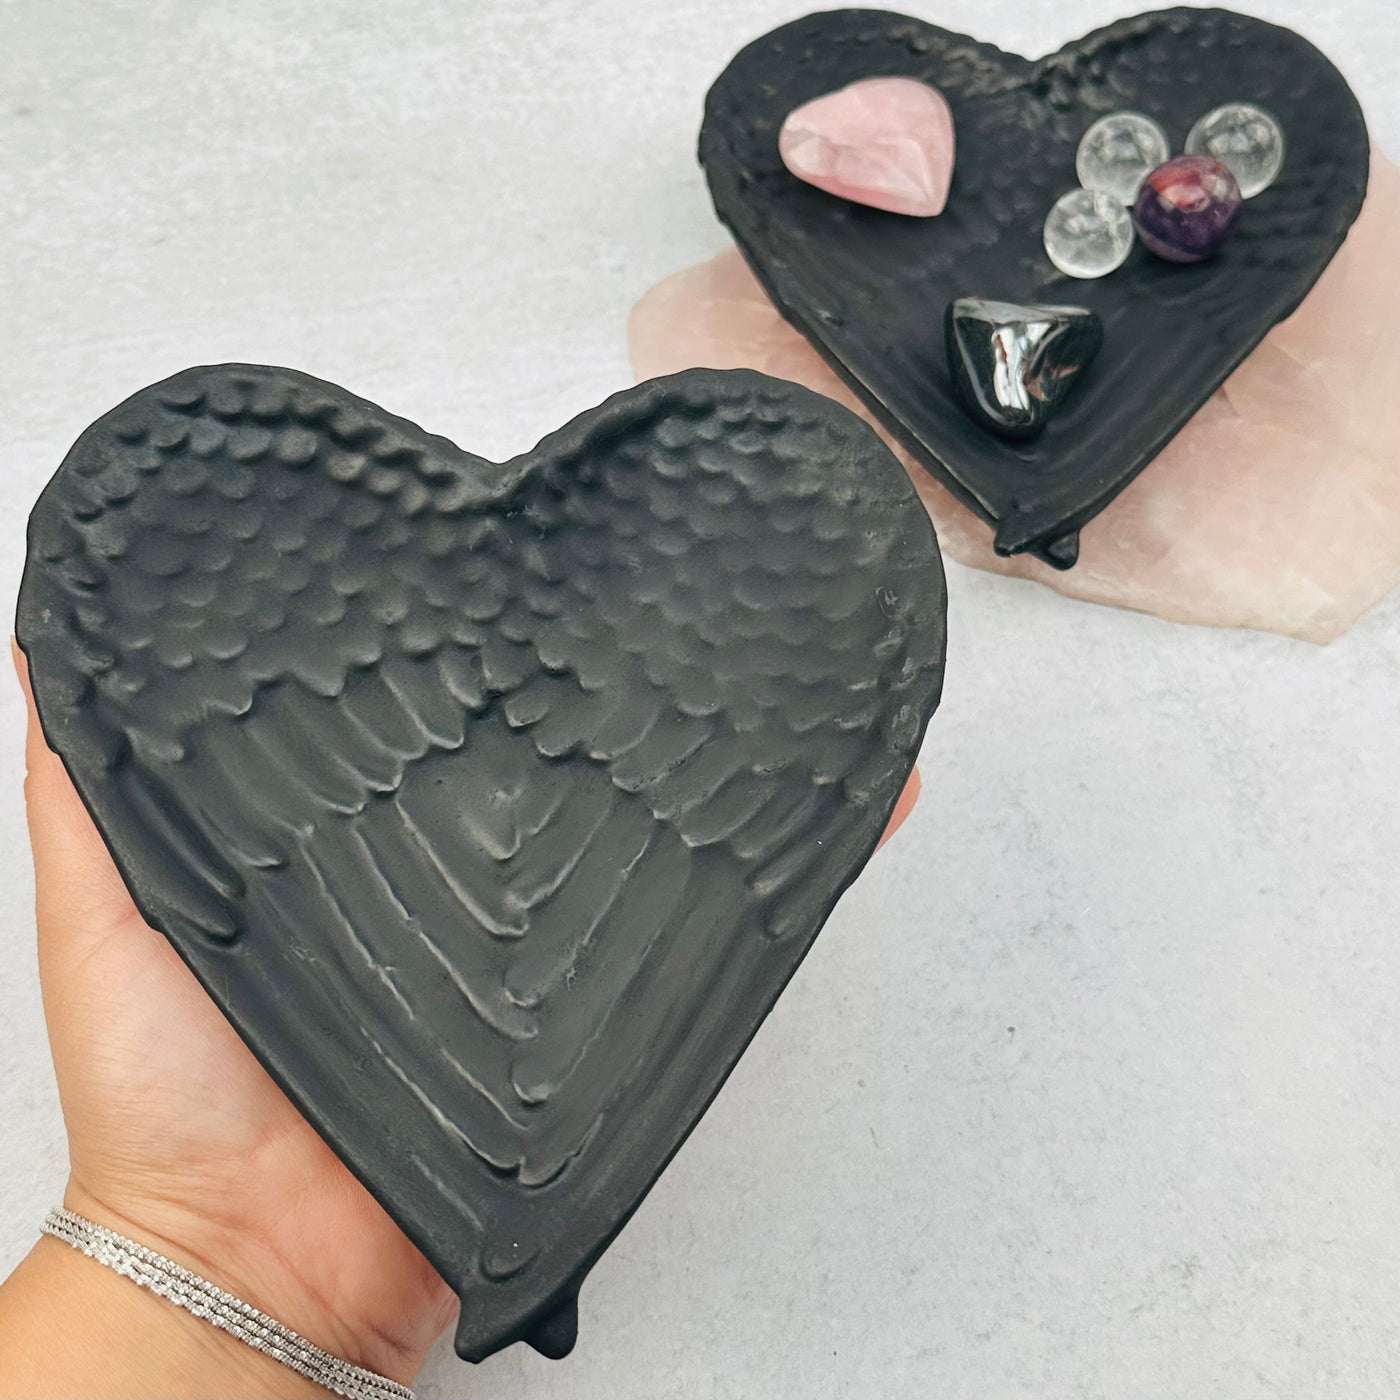 Shungite Angel Wings Heart Bowl in hand for size reference 